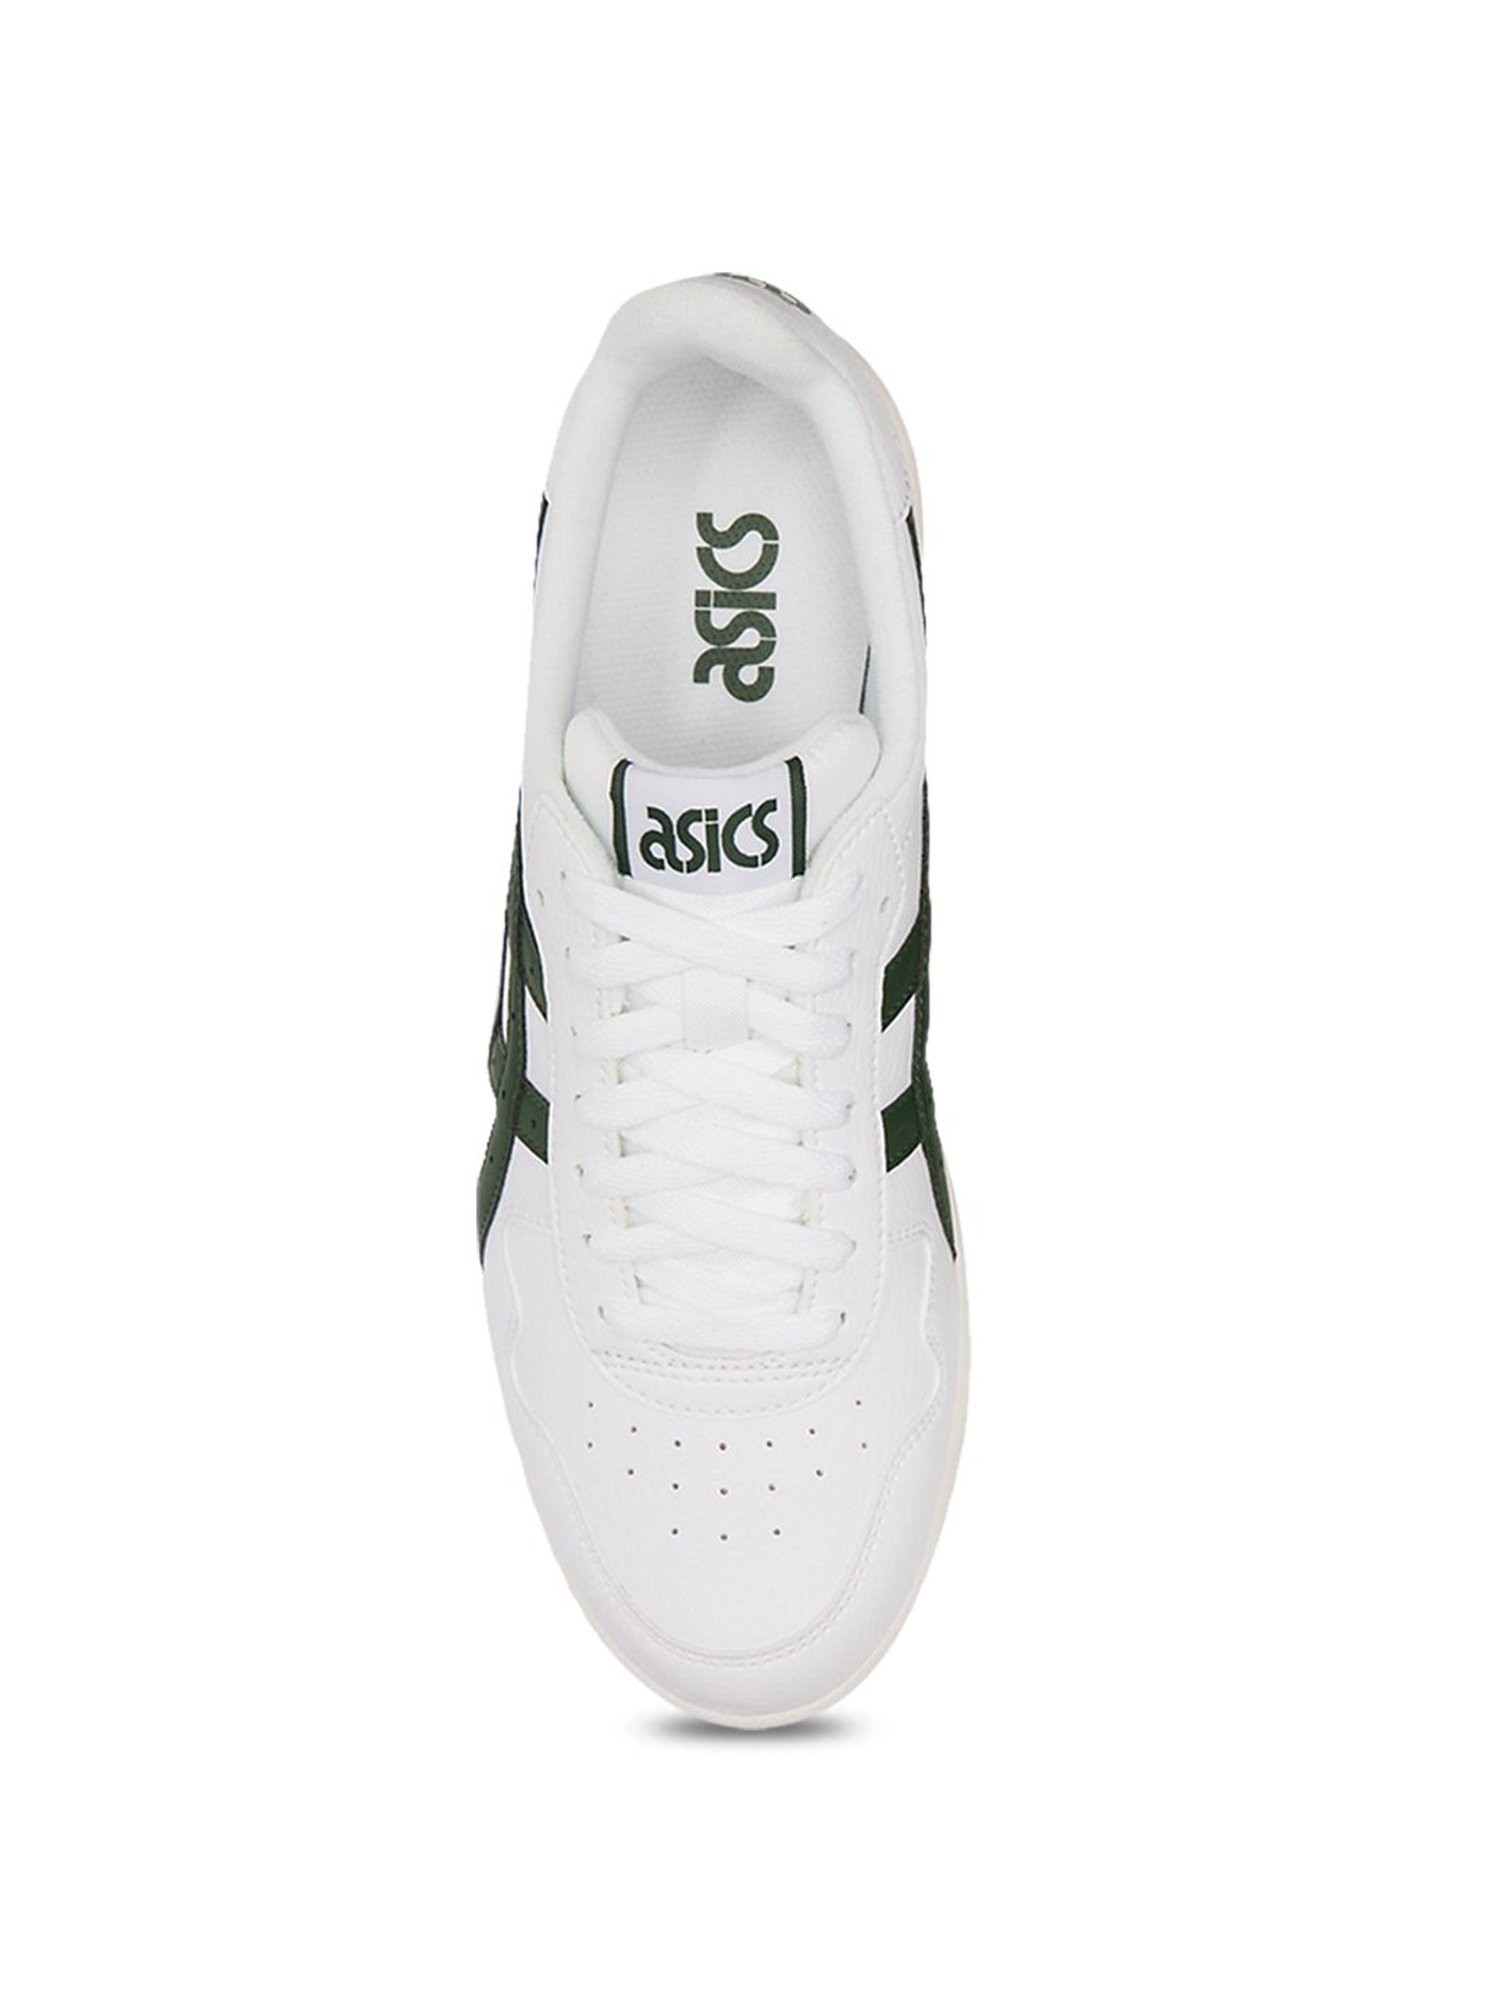 Women's GEL-1130 | White/Pure Silver | Sportstyle Shoes | ASICS